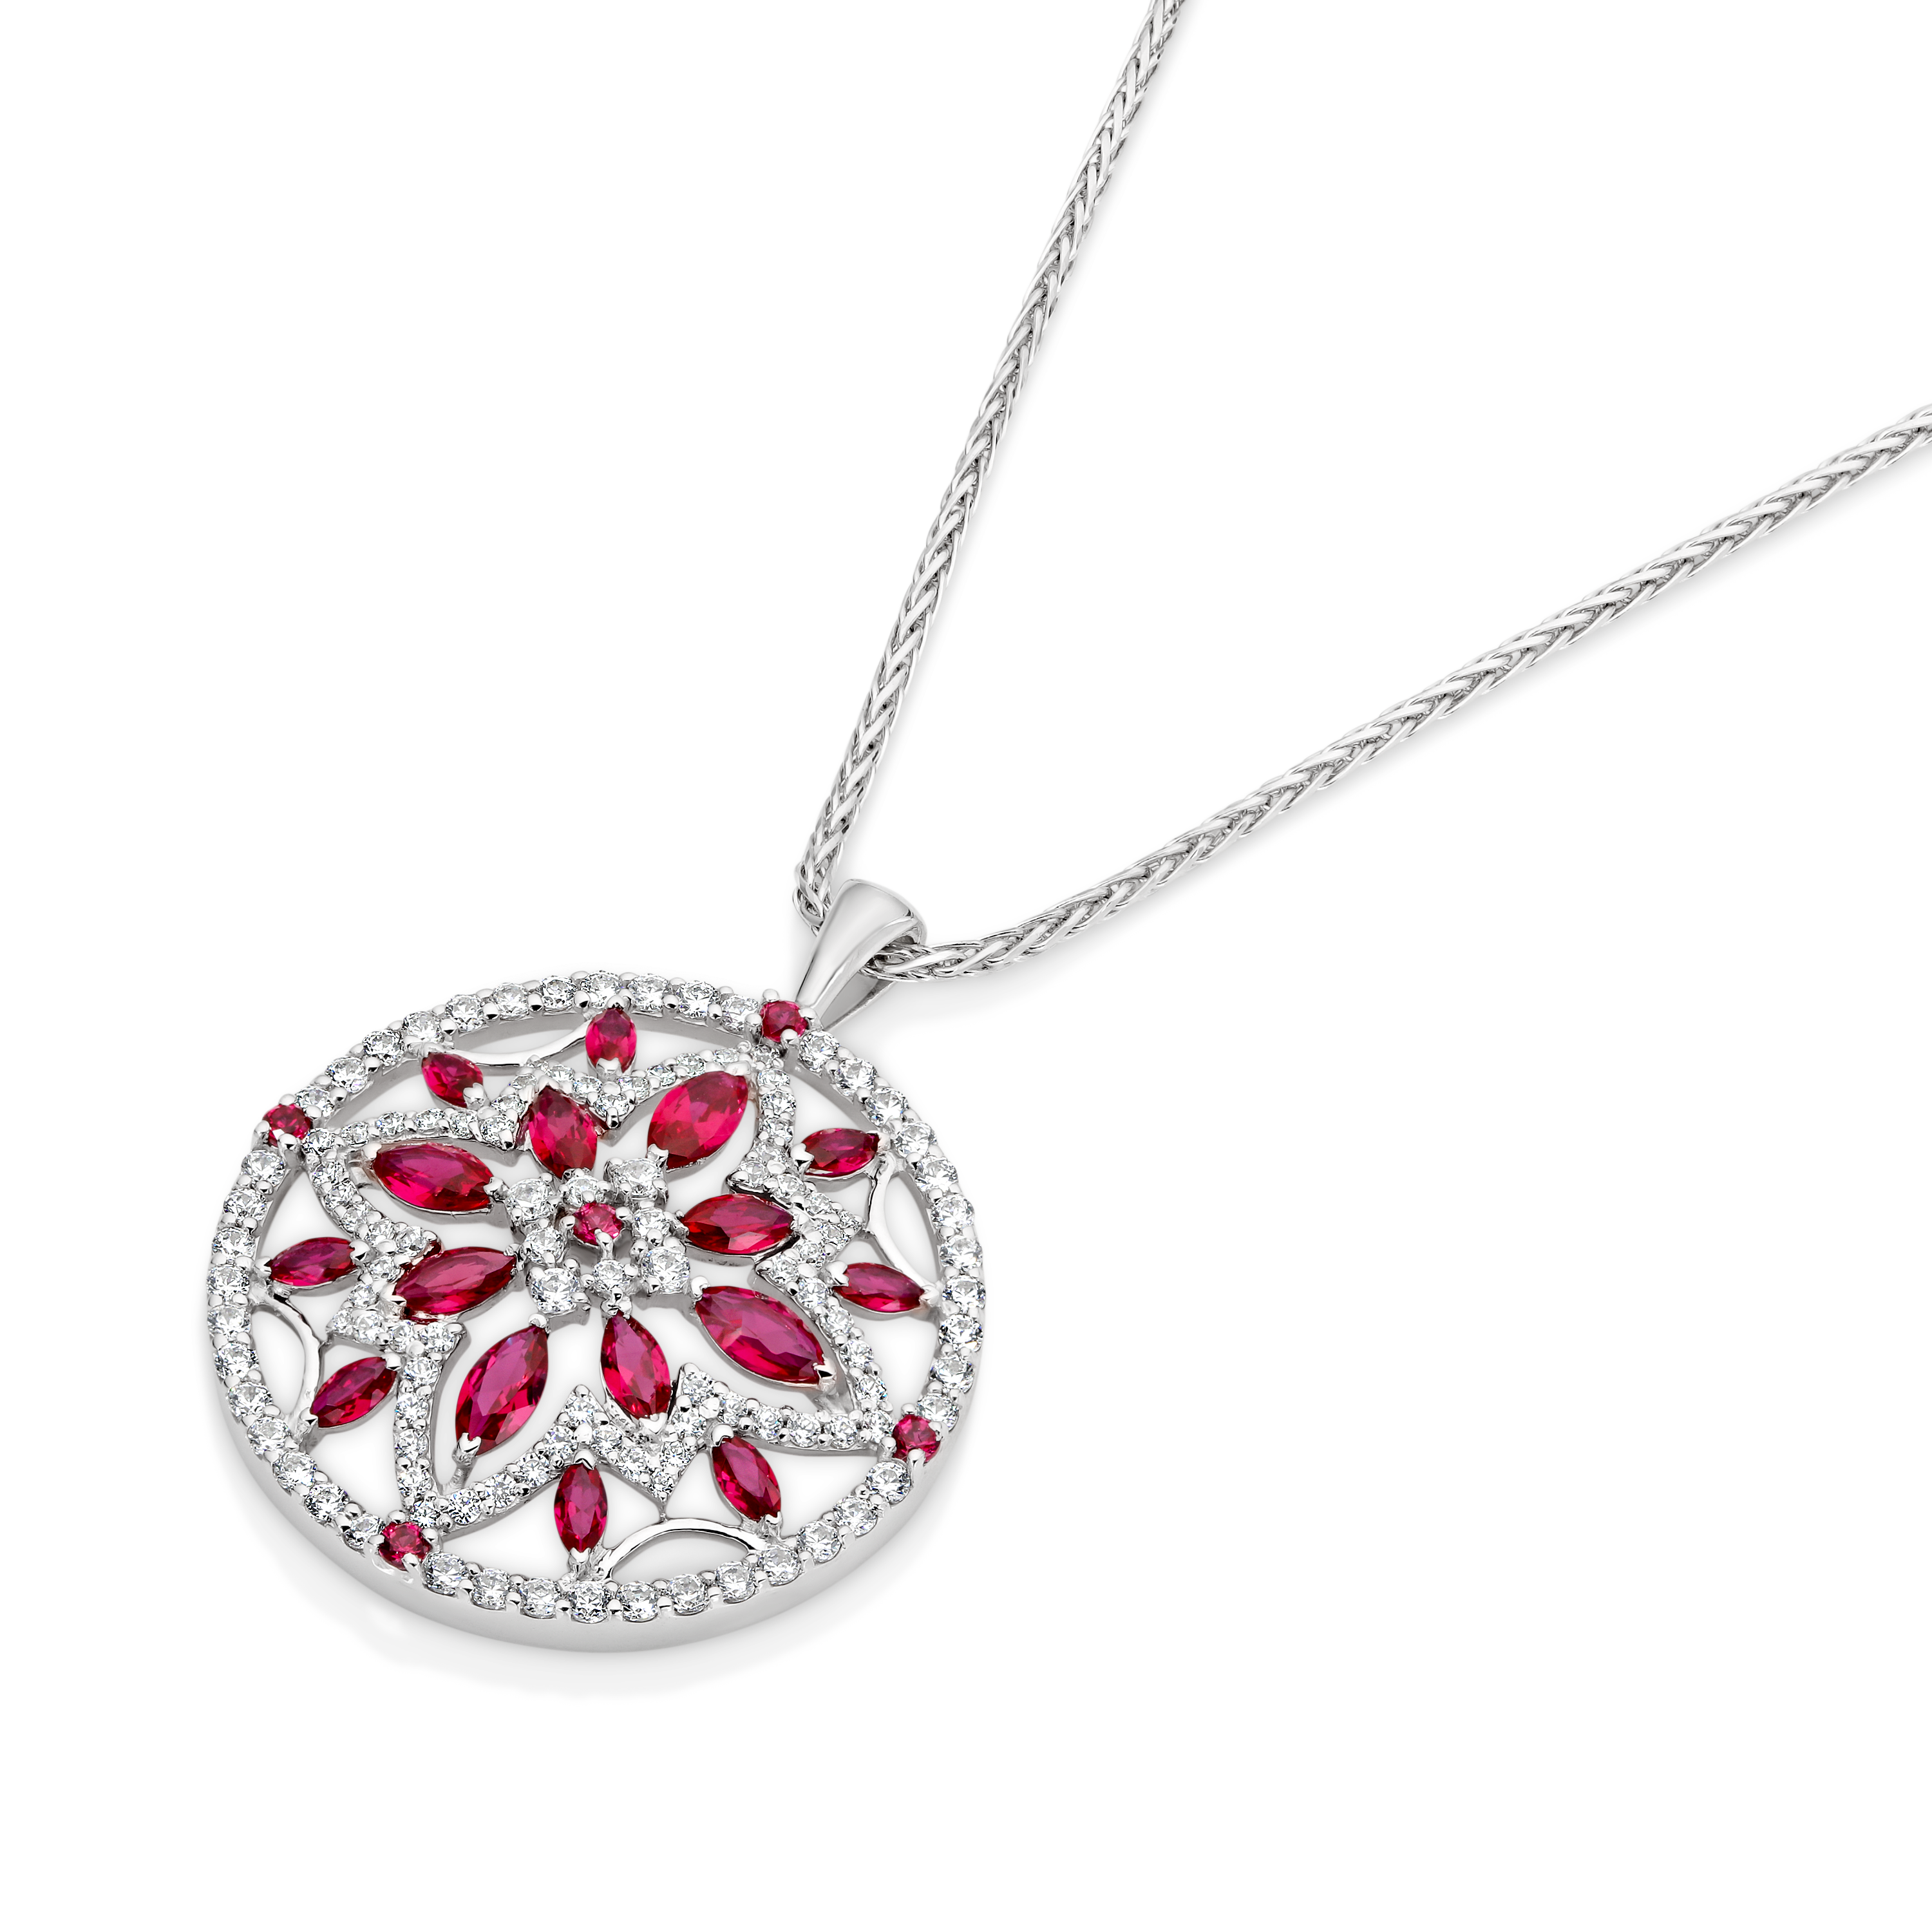 The "Scarlett" Limited Edition Pendant